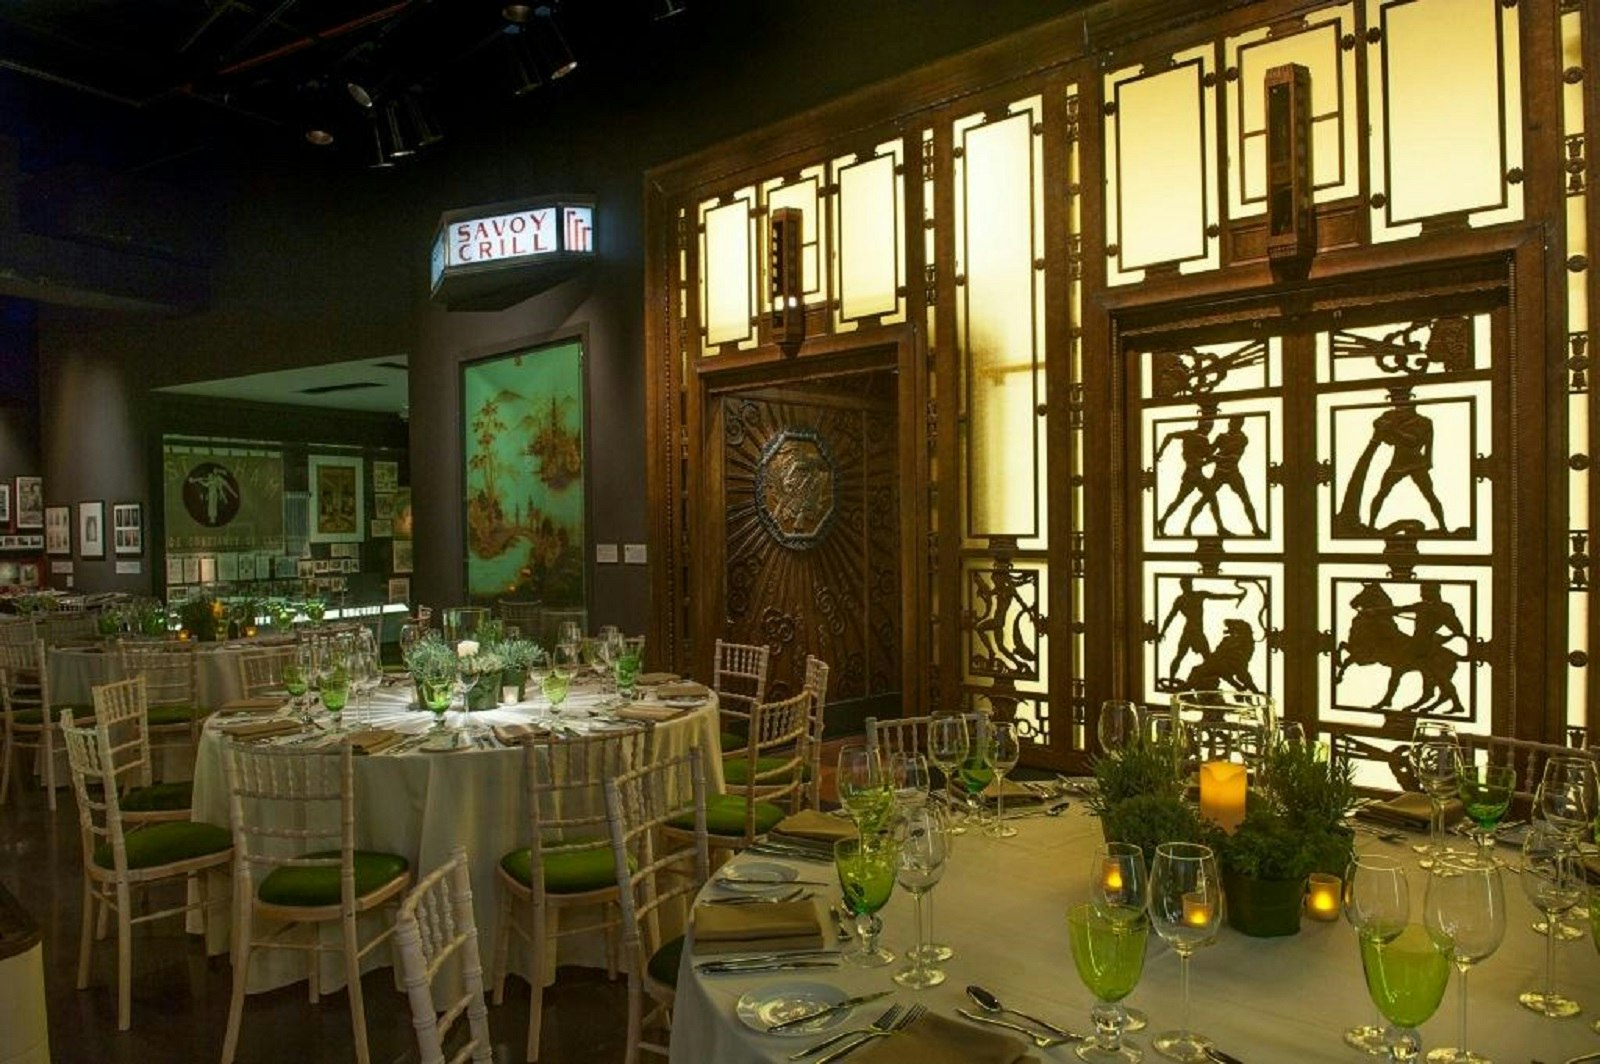 Award Ceremony Venues - Museum of London - Dining  in Galleries - Banner